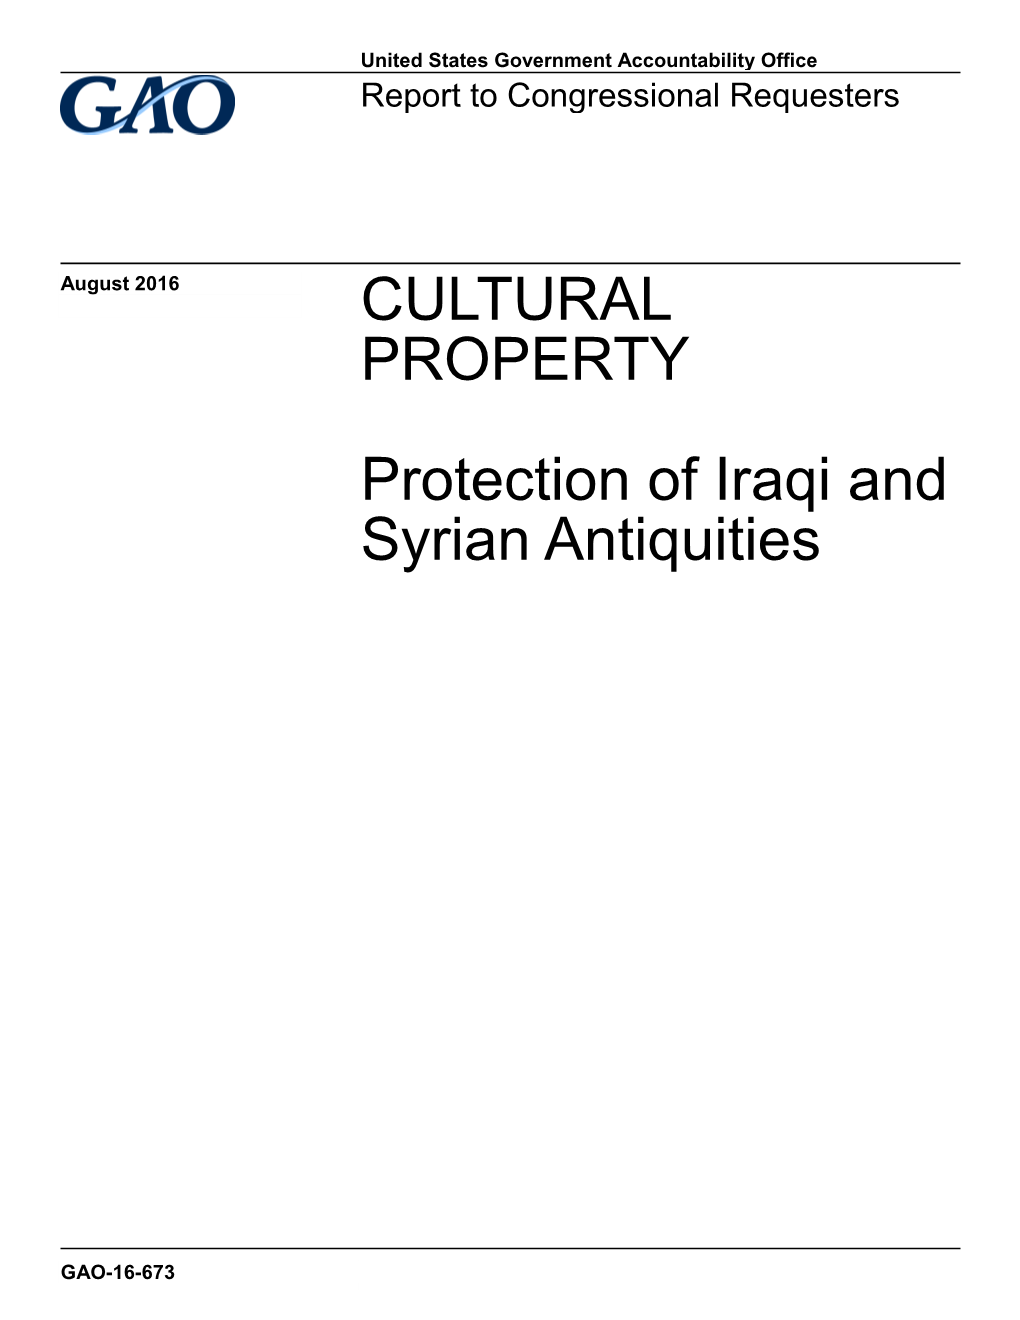 GAO-16-673, CULTURAL PROPERTY: Protection of Iraqi and Syrian